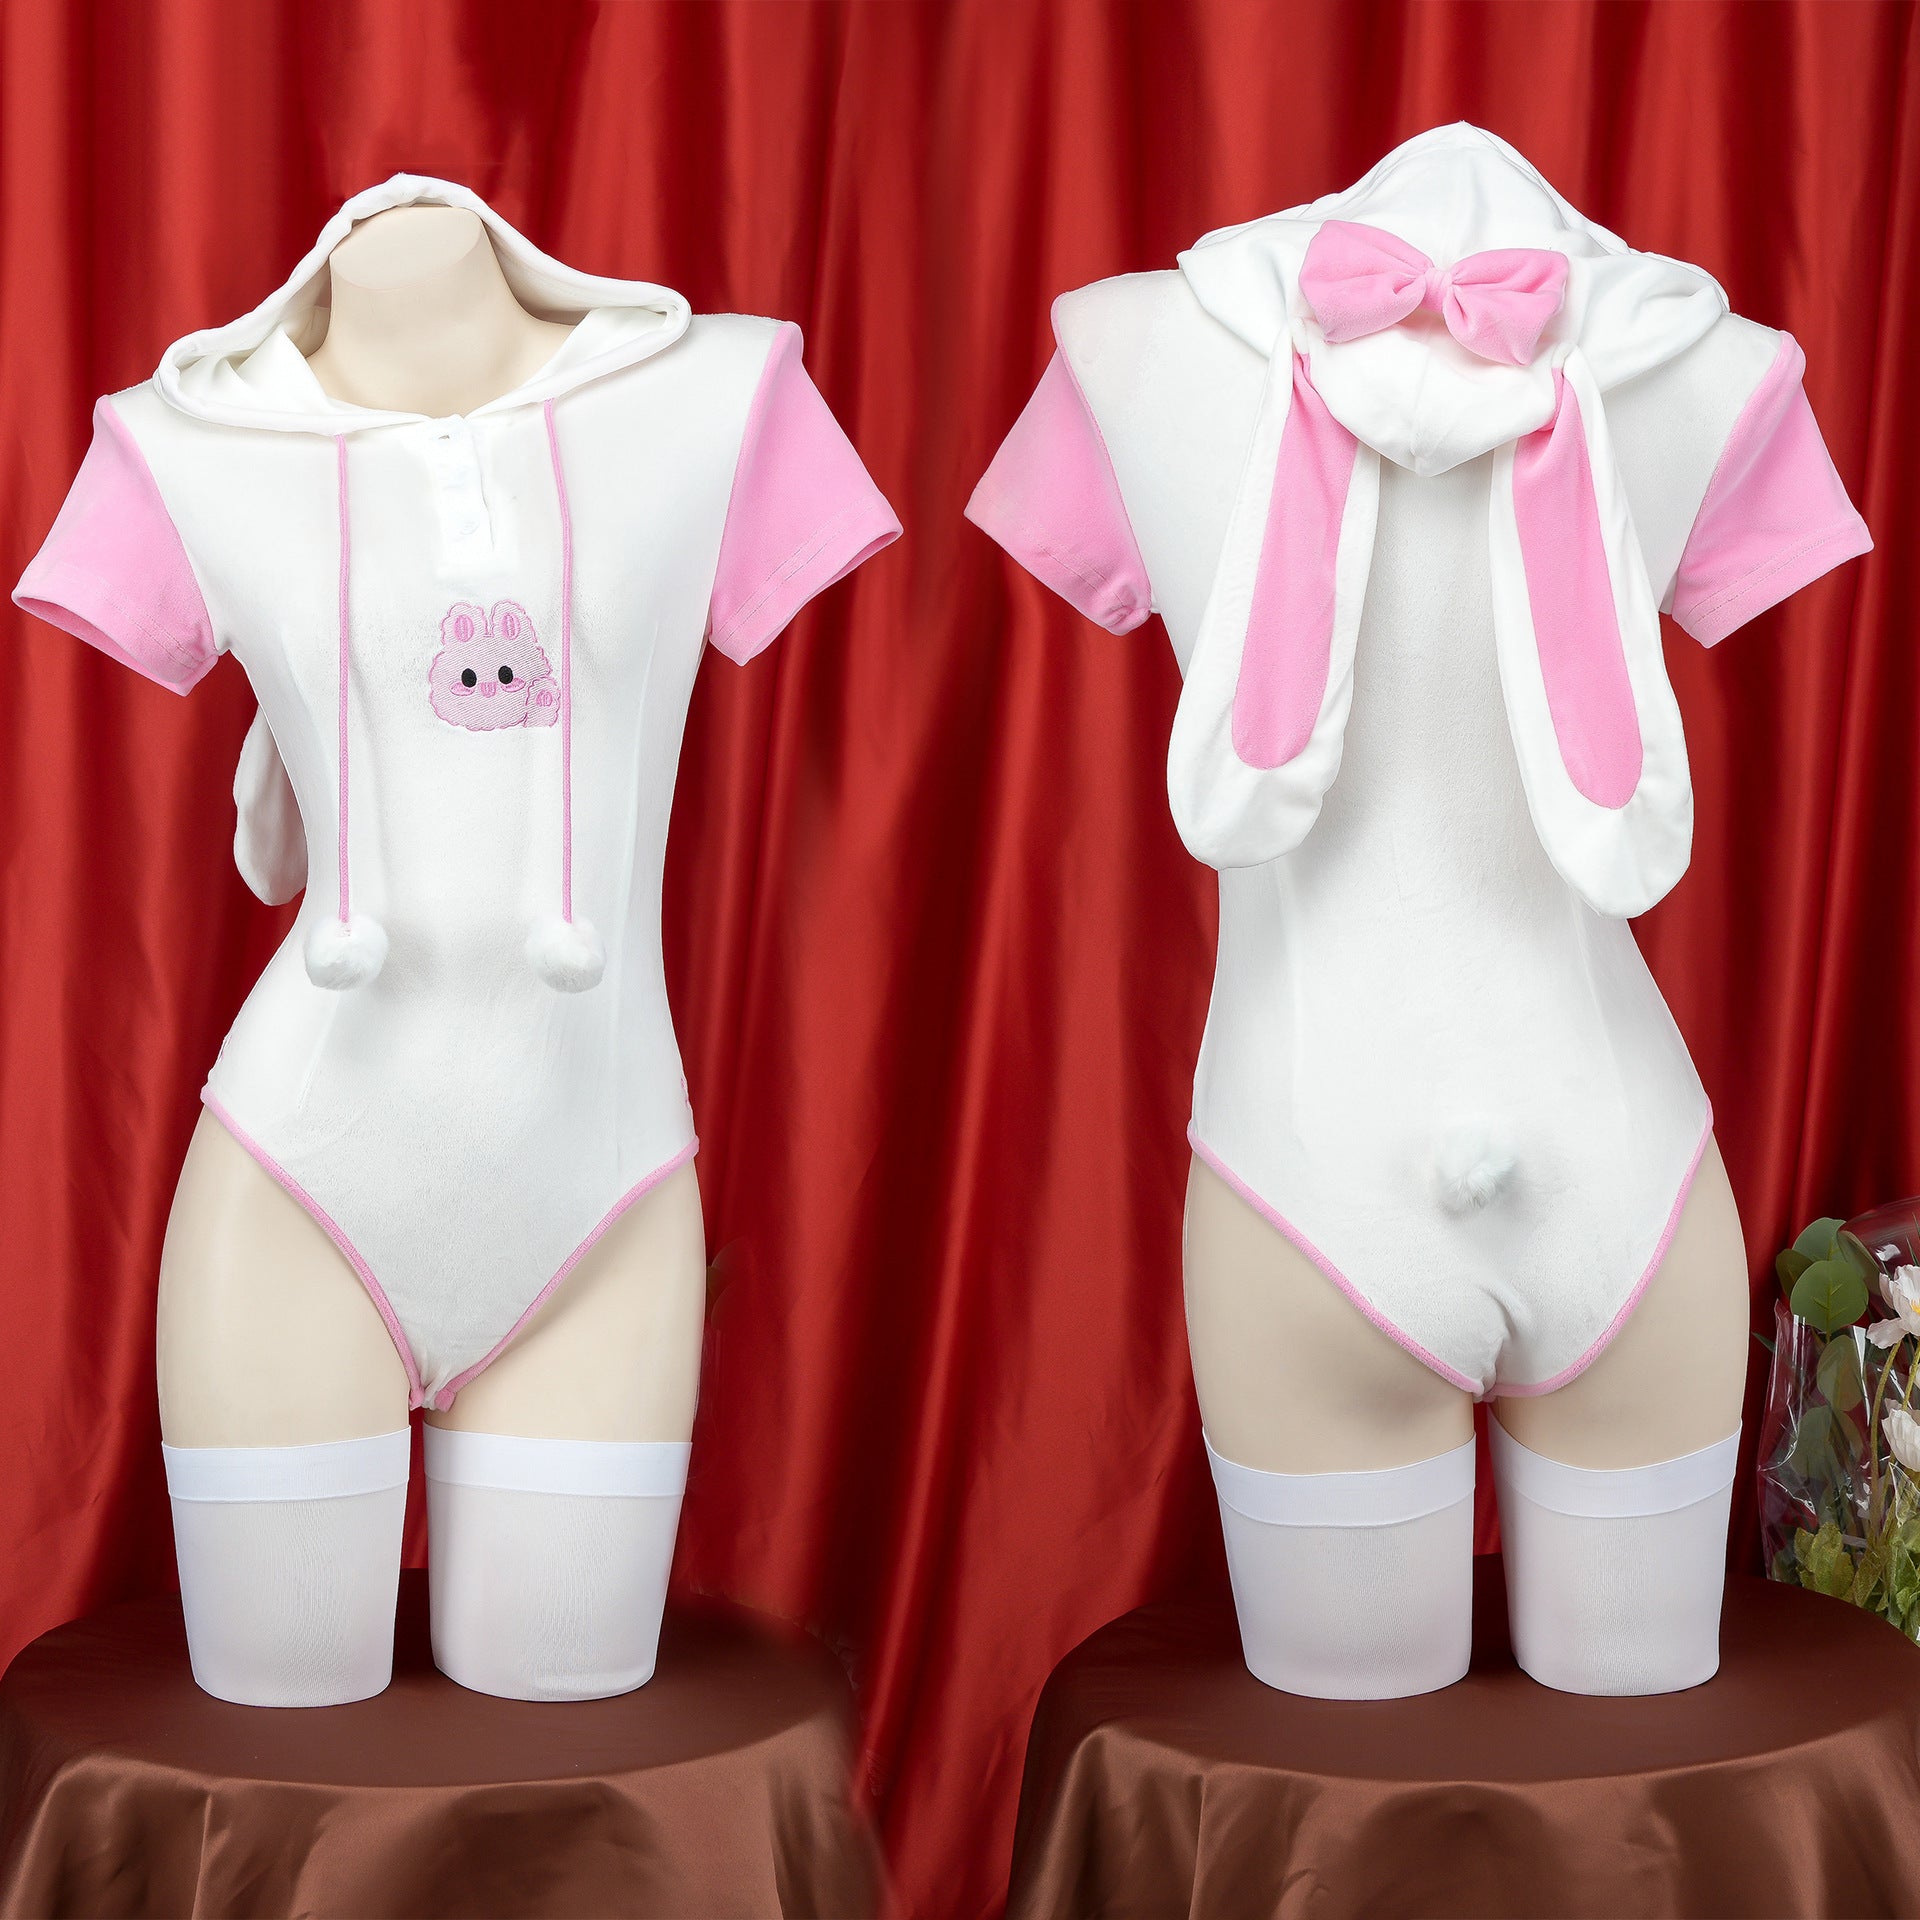 Pink and White Kawaii Bunny Bodysuit Lingerie Front And Back - Femboy Fashion